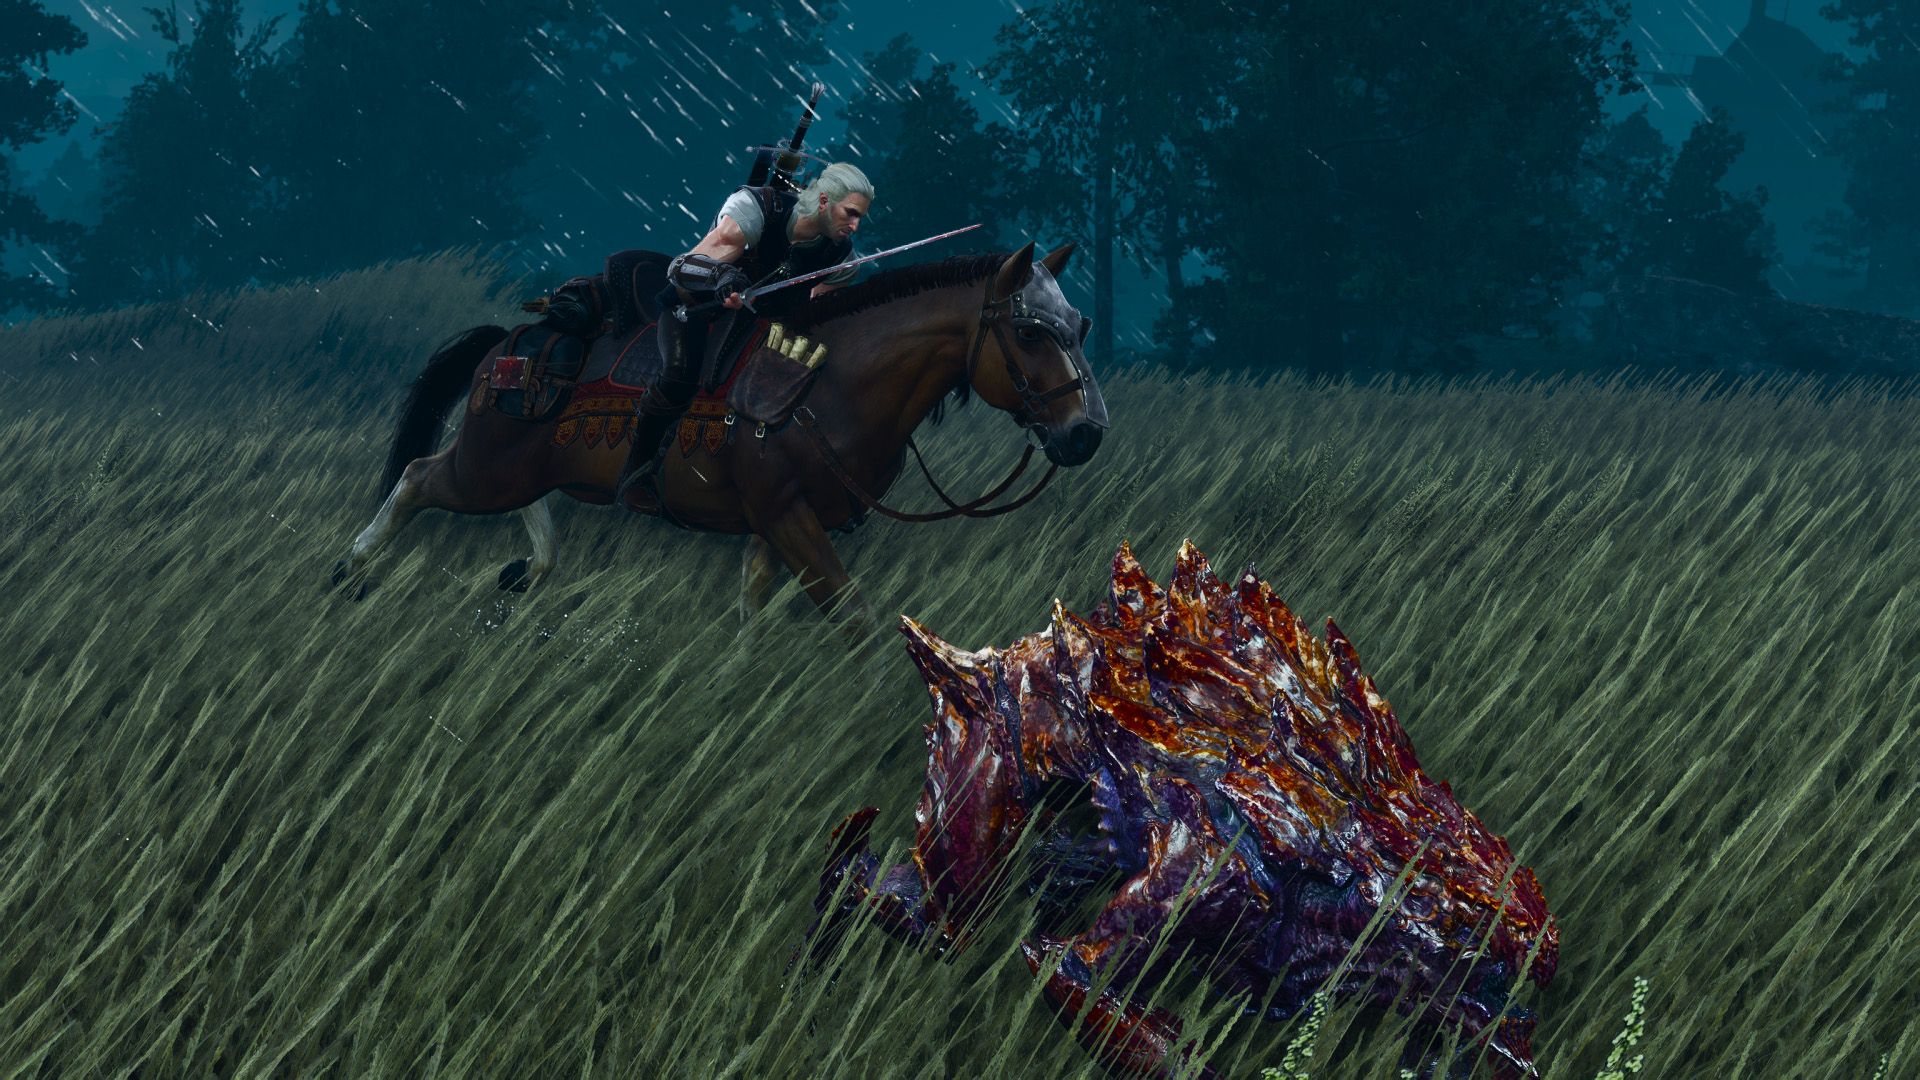 Geralt chases a monster on horseback, following it through a field at night.